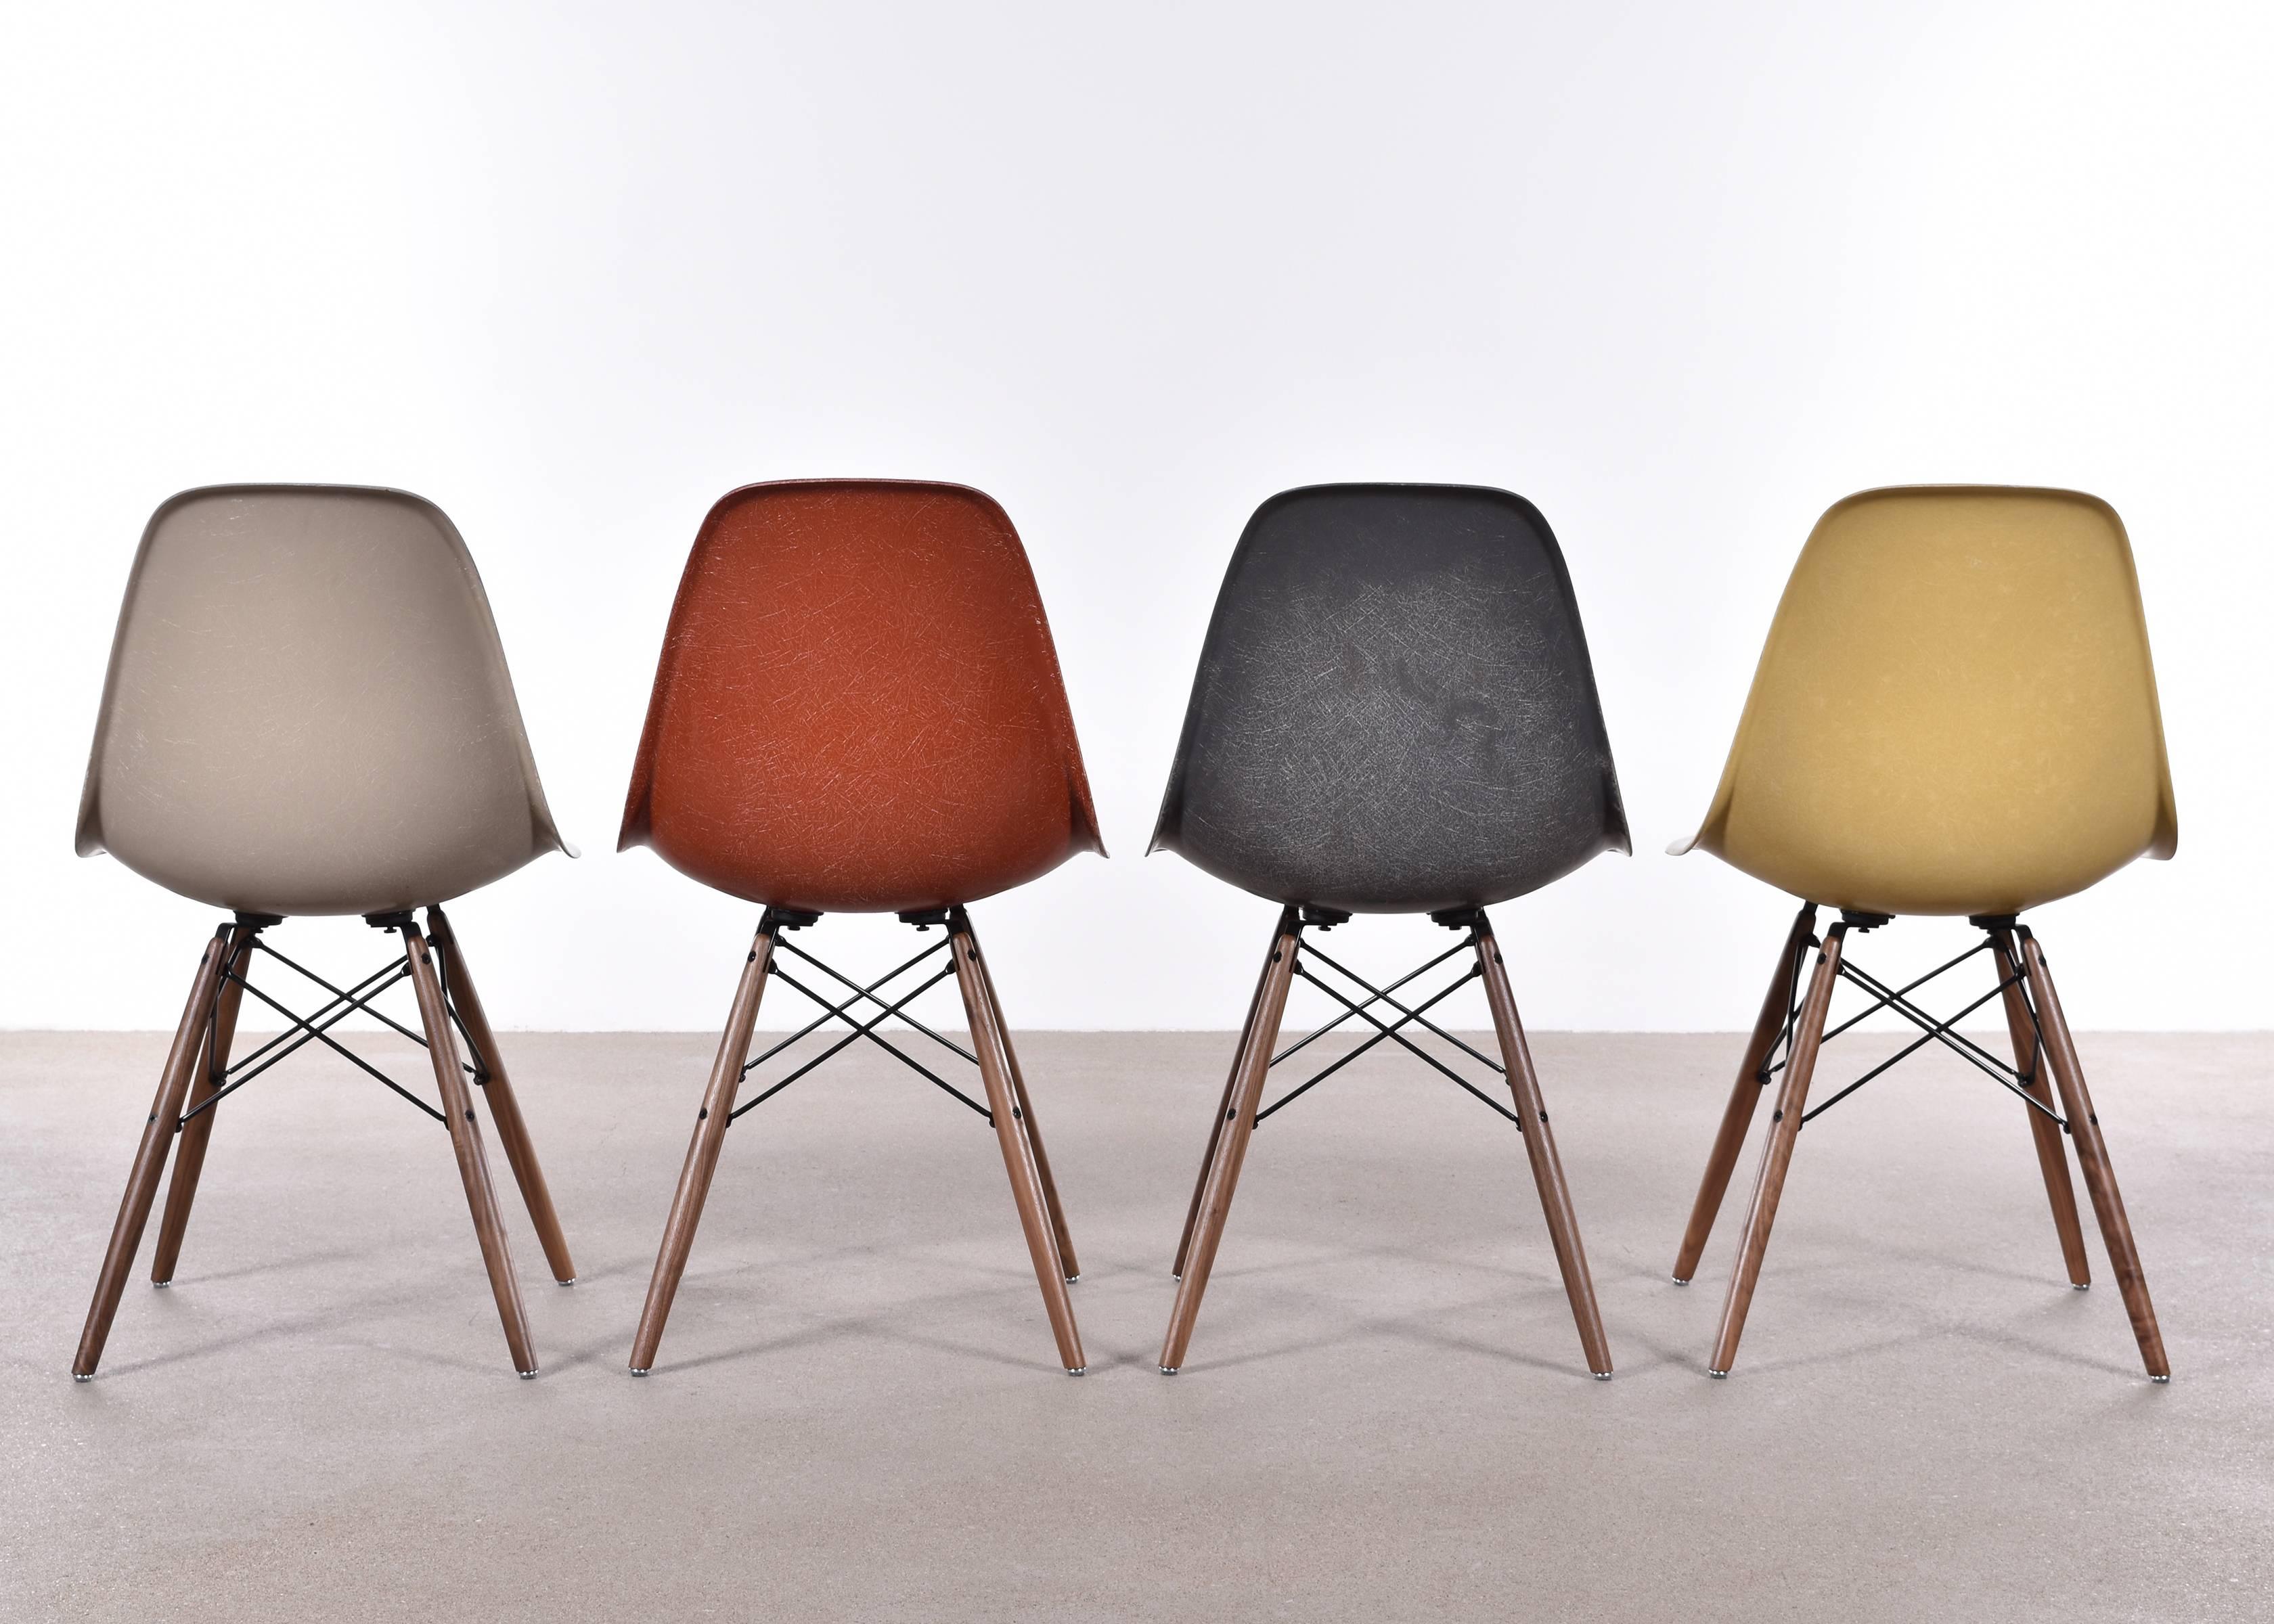 Beautiful iconic DSW chairs in the colors: Elephant hide grey, terra cotta, ochre light and greige. Shells are in very good or excellent condition with only slight traces of use. Replaced shock mounts which guarantee save usability for the next